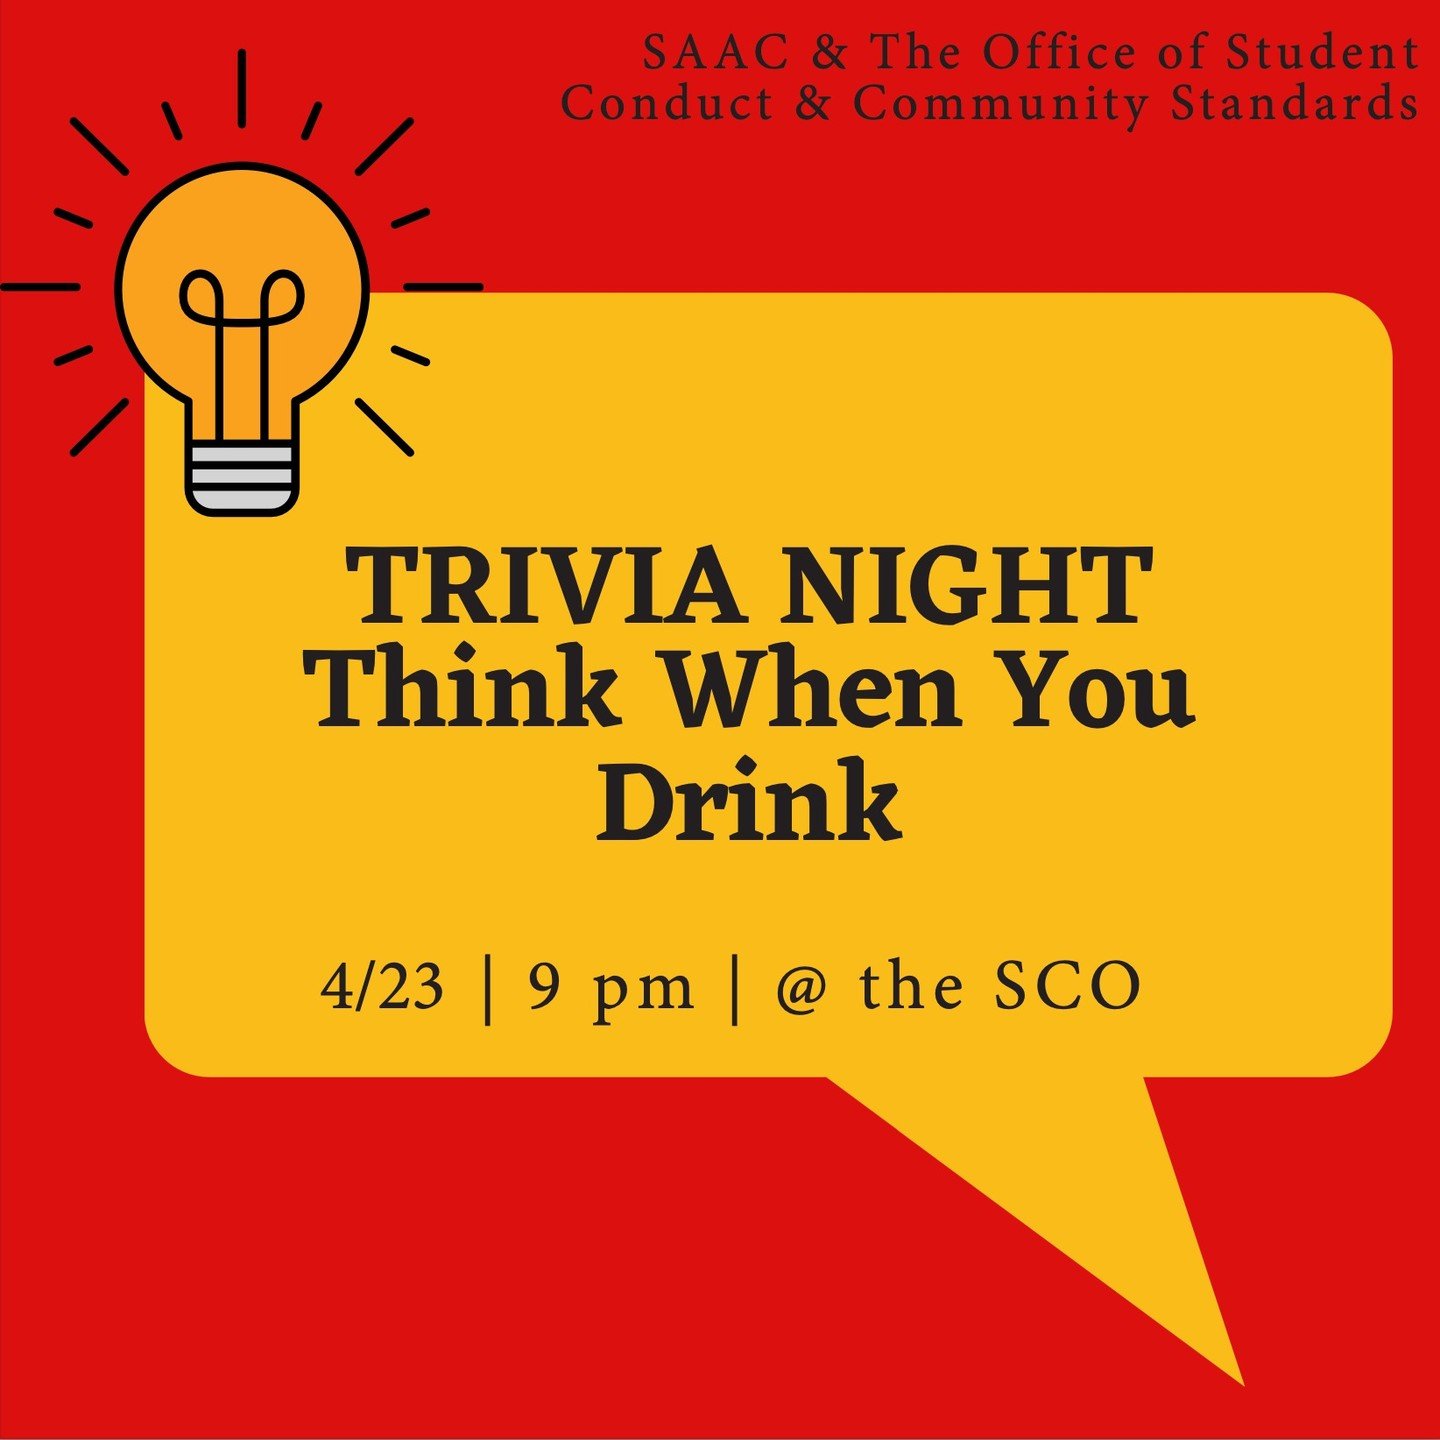 Join the Student-Athlete Advisory Committee (SAAC) and the Office of Student Conduct &amp; Community Standards for a trivia night at the &rsquo;Sco on Tuesday, April 23 at 9 p.m. Play with a team or by yourself for the chance to win great prizes. Que